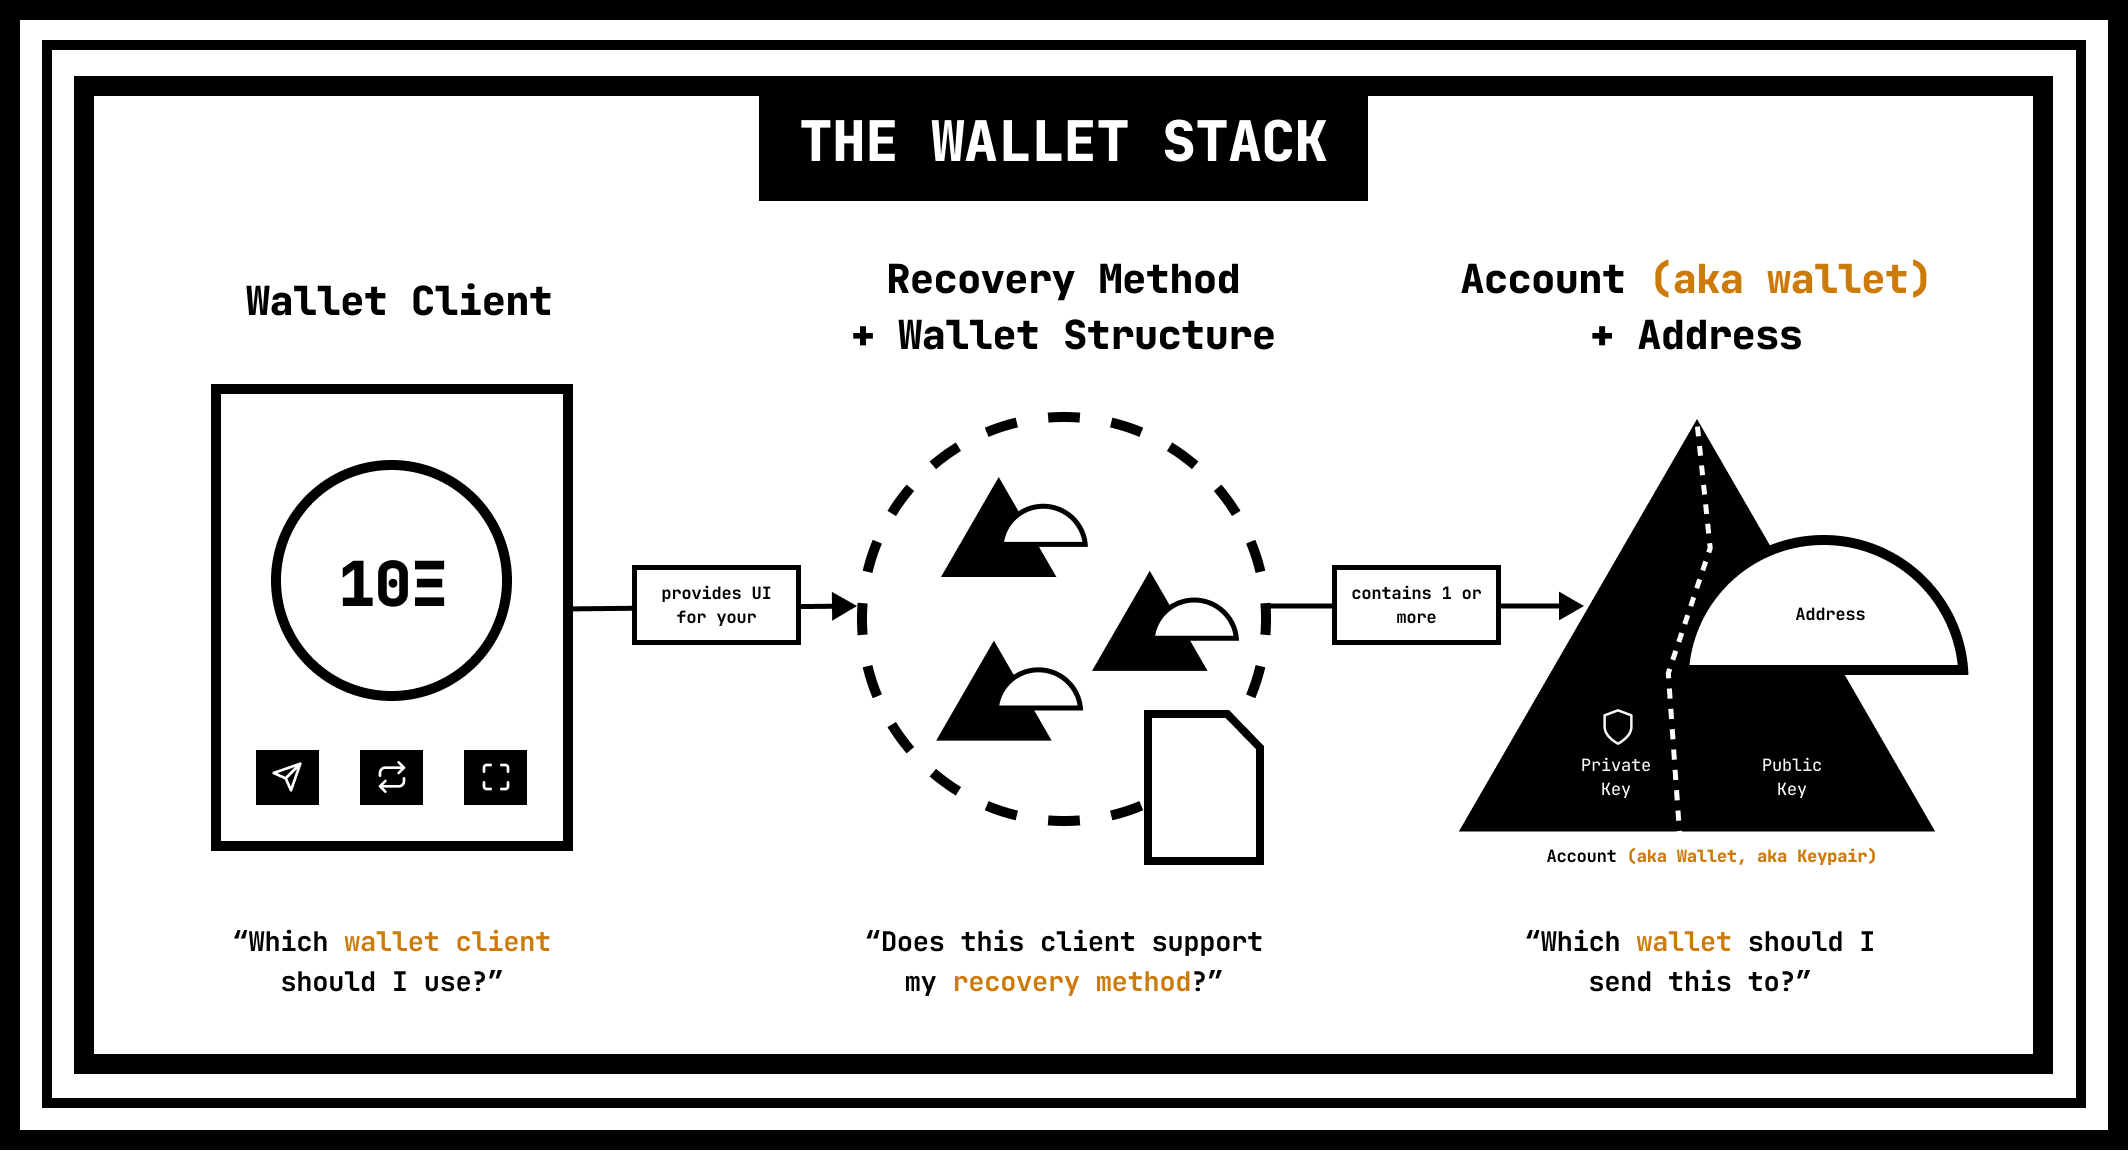 The revised Wallet Stack diagram.